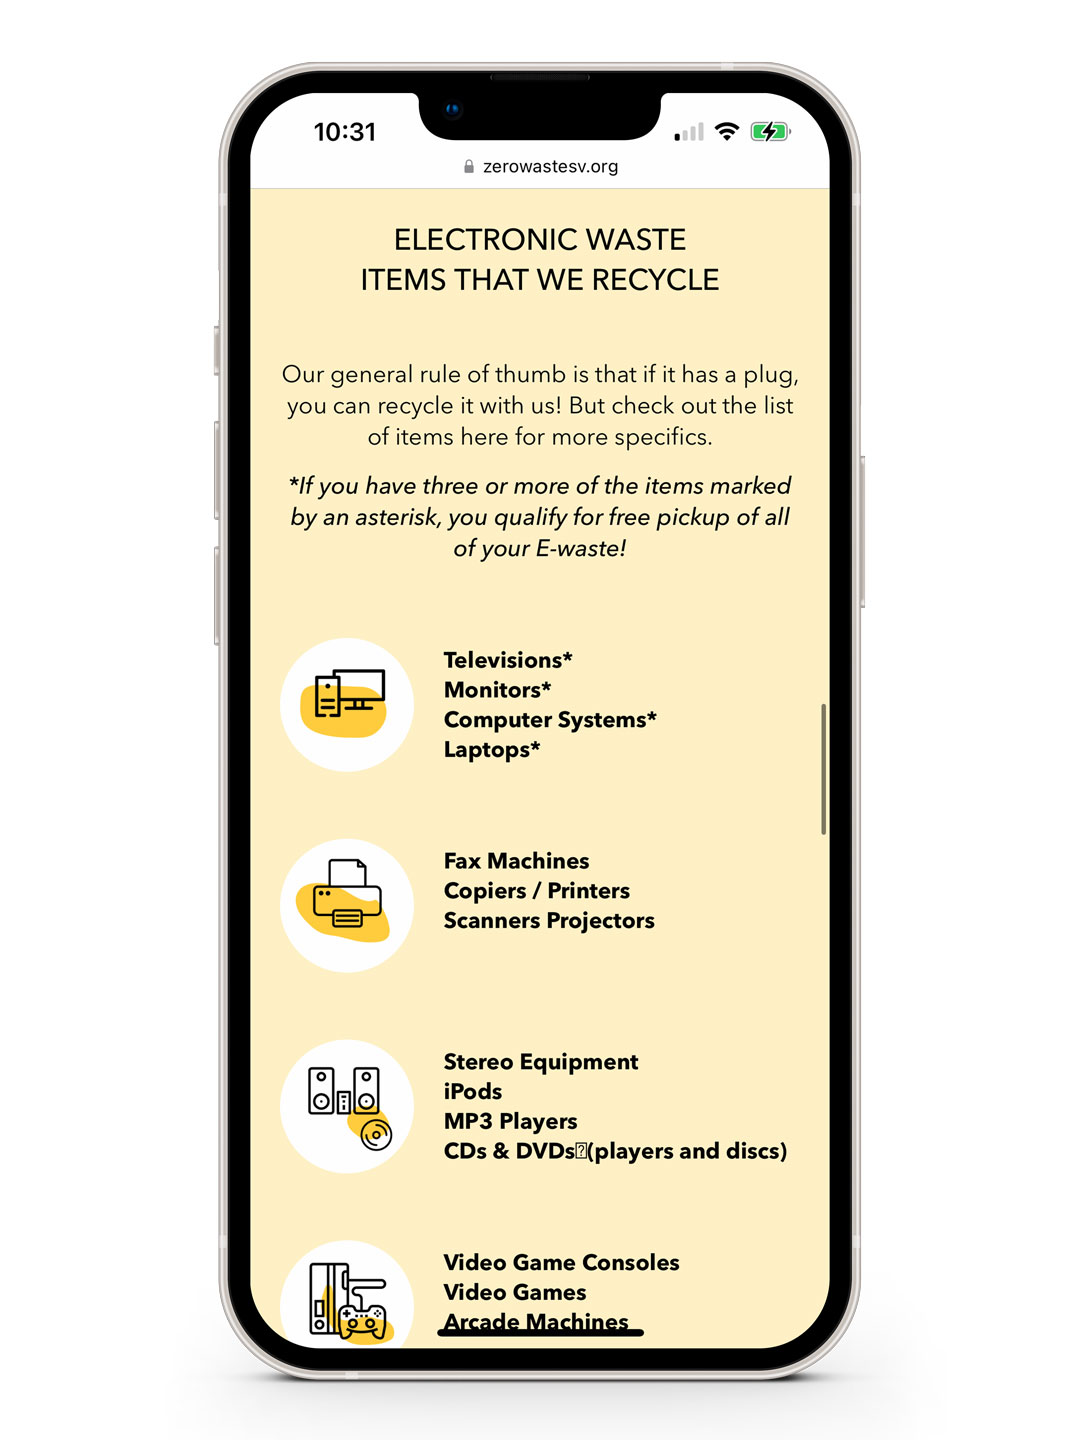 Screenshot of the ZeroWasteSV website on a mobile device